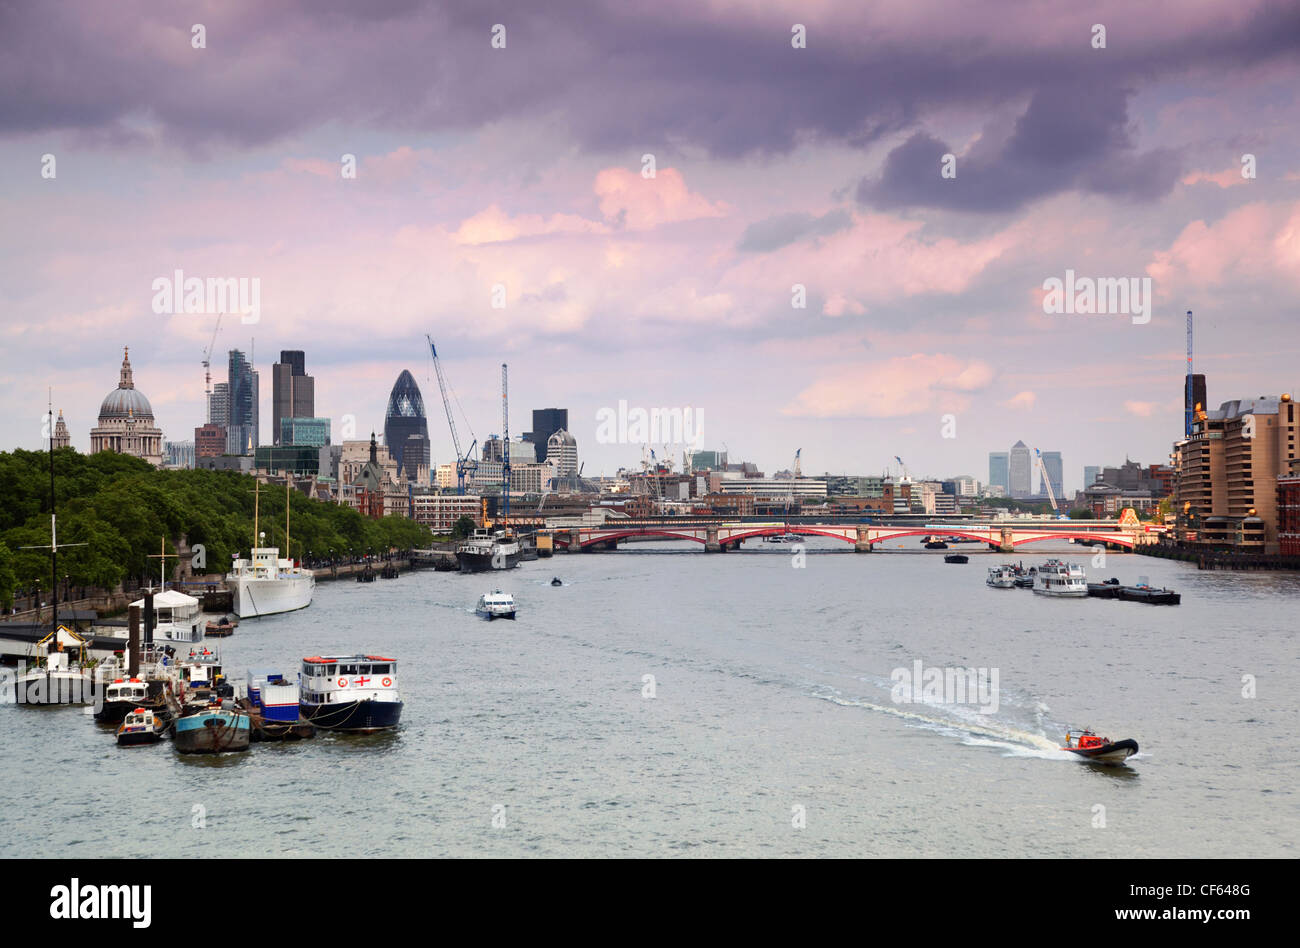 boats floating on river Thames. Westminster Bridge. clouds in sky Stock Photo